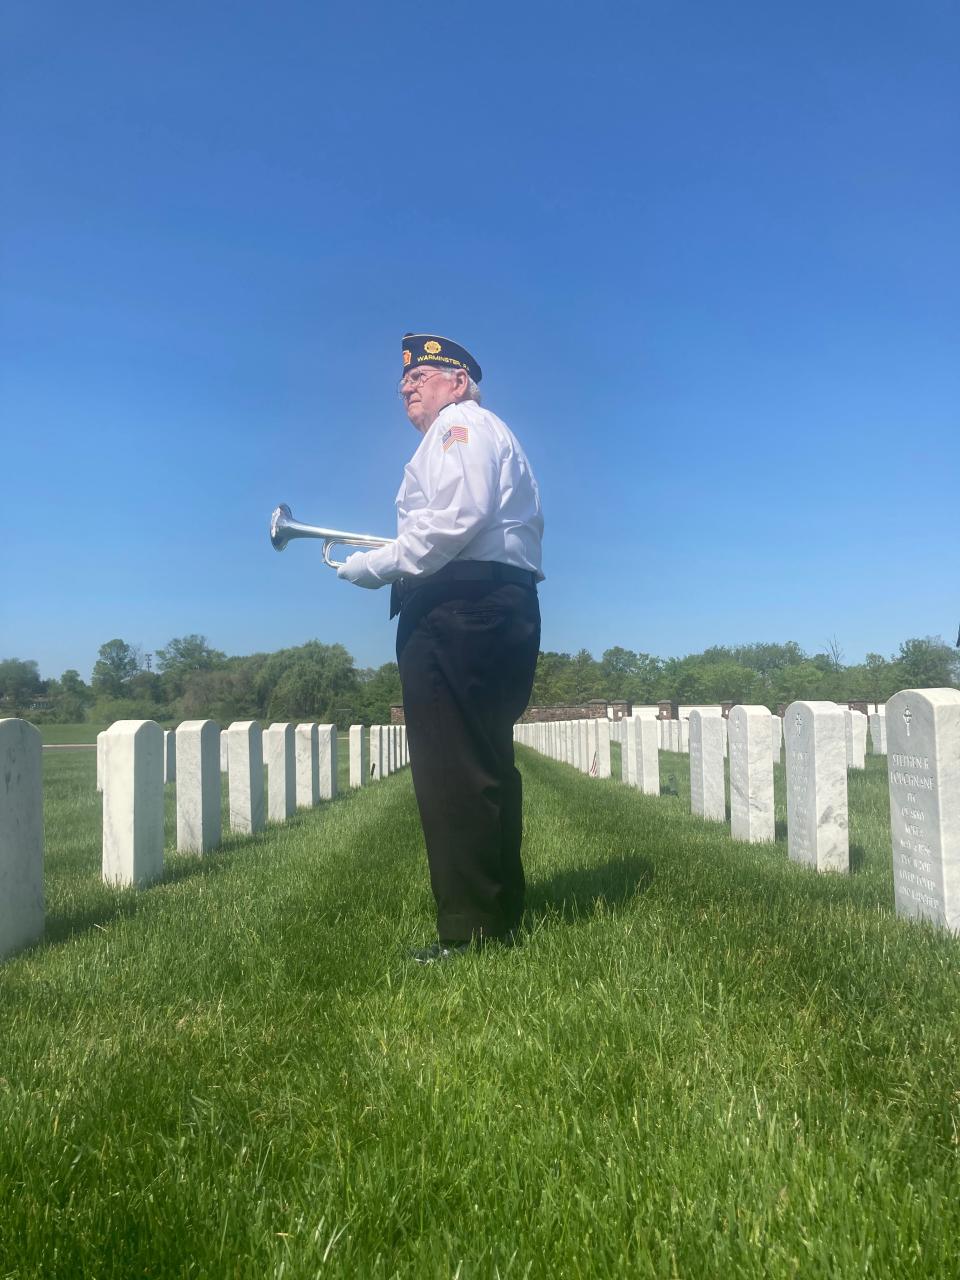 Funeral bugler Jim McDevitt, 83, of Southampton, stands amid rows of veterans' final resting place at Washington Crossing National Cemetery on Thursday, May 11, 2023. "Being part of a final goodbye to a veteran is an honor," said the Coast Guard vet.